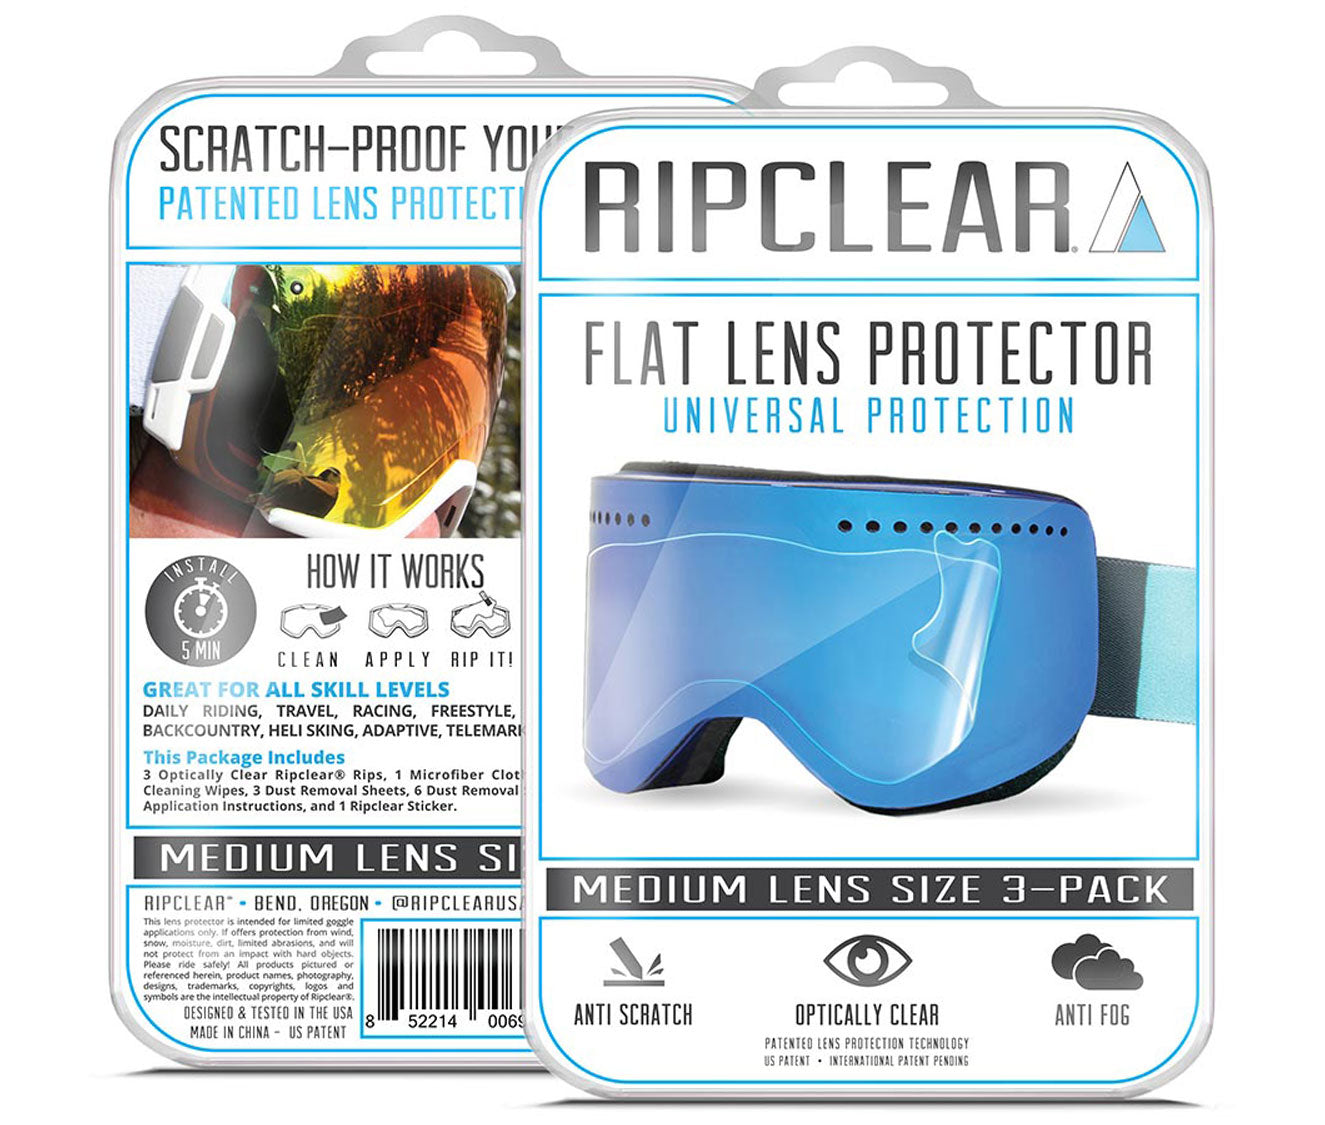 Ripclear Spy Optic Ace Snow Goggle Lens Protector (Universal Fit) - 3 Pack